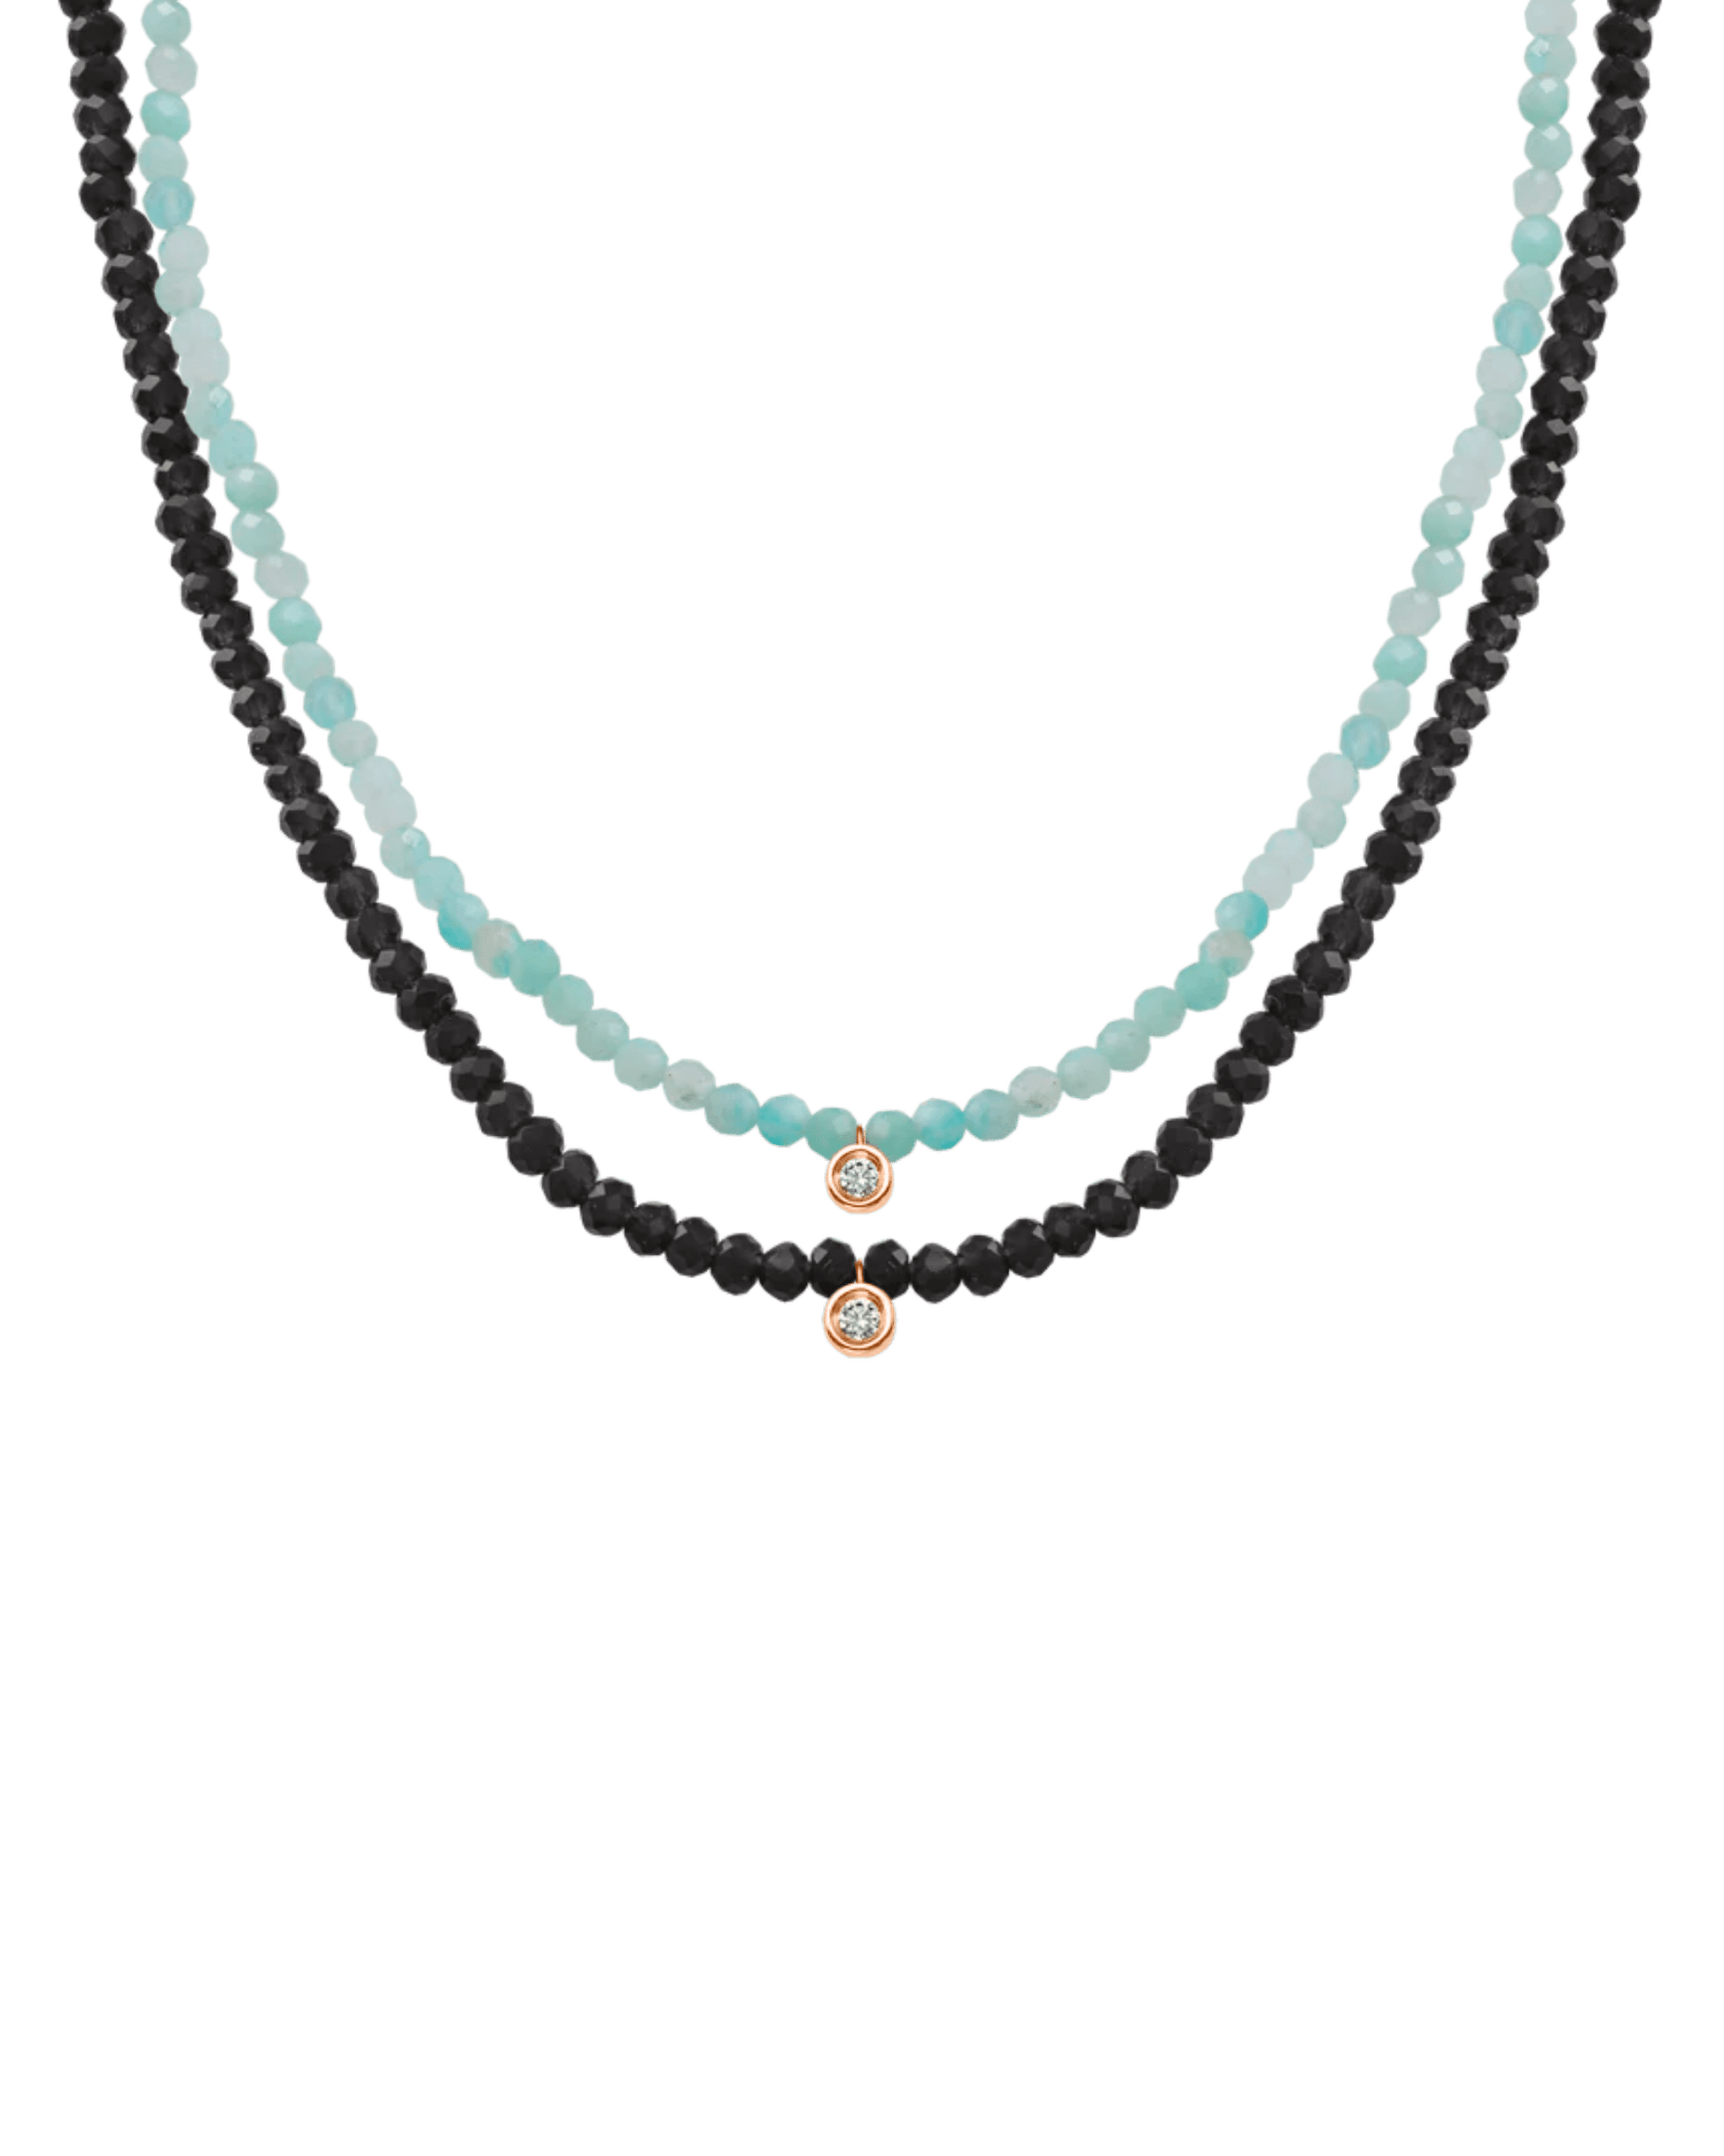 Set of Gemstone & Diamond Necklaces - 14K Rose Gold Necklaces magal-dev Glass Beads Black Spinnel Small 0.03ct 